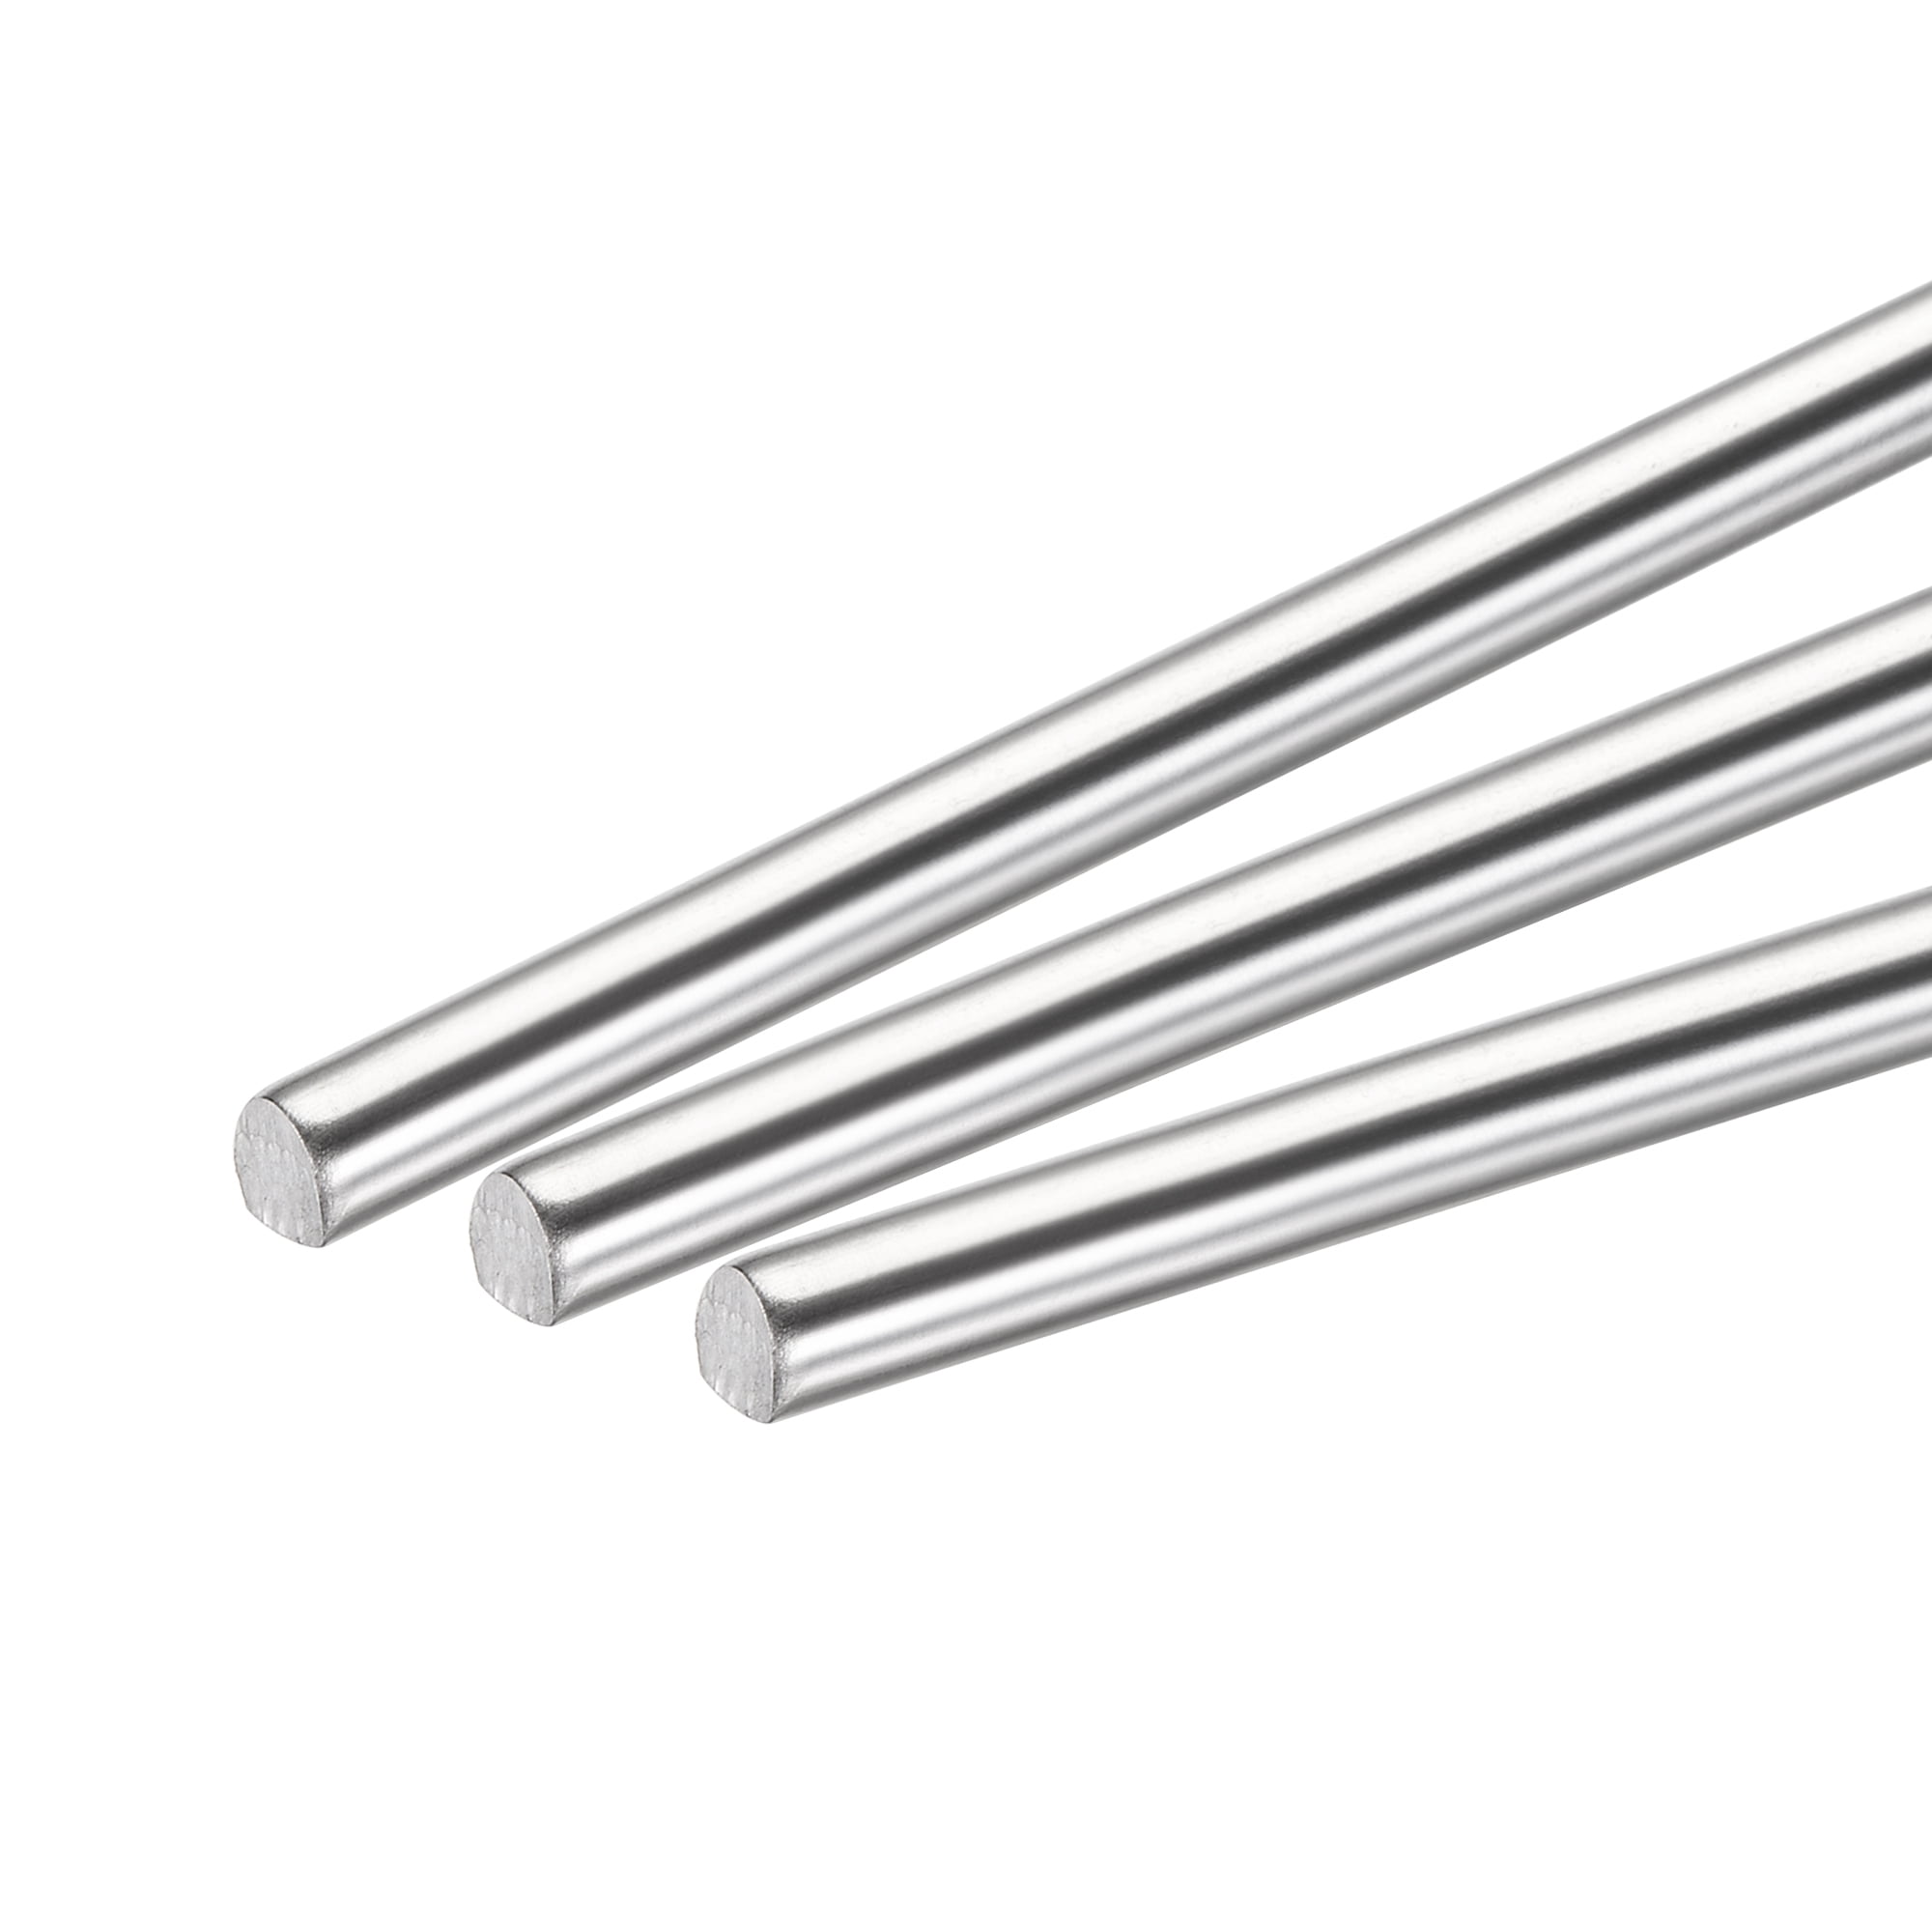 3mm x 75mm 304 Stainless Steel Solid Round Rod for DIY Craft 10pcs 